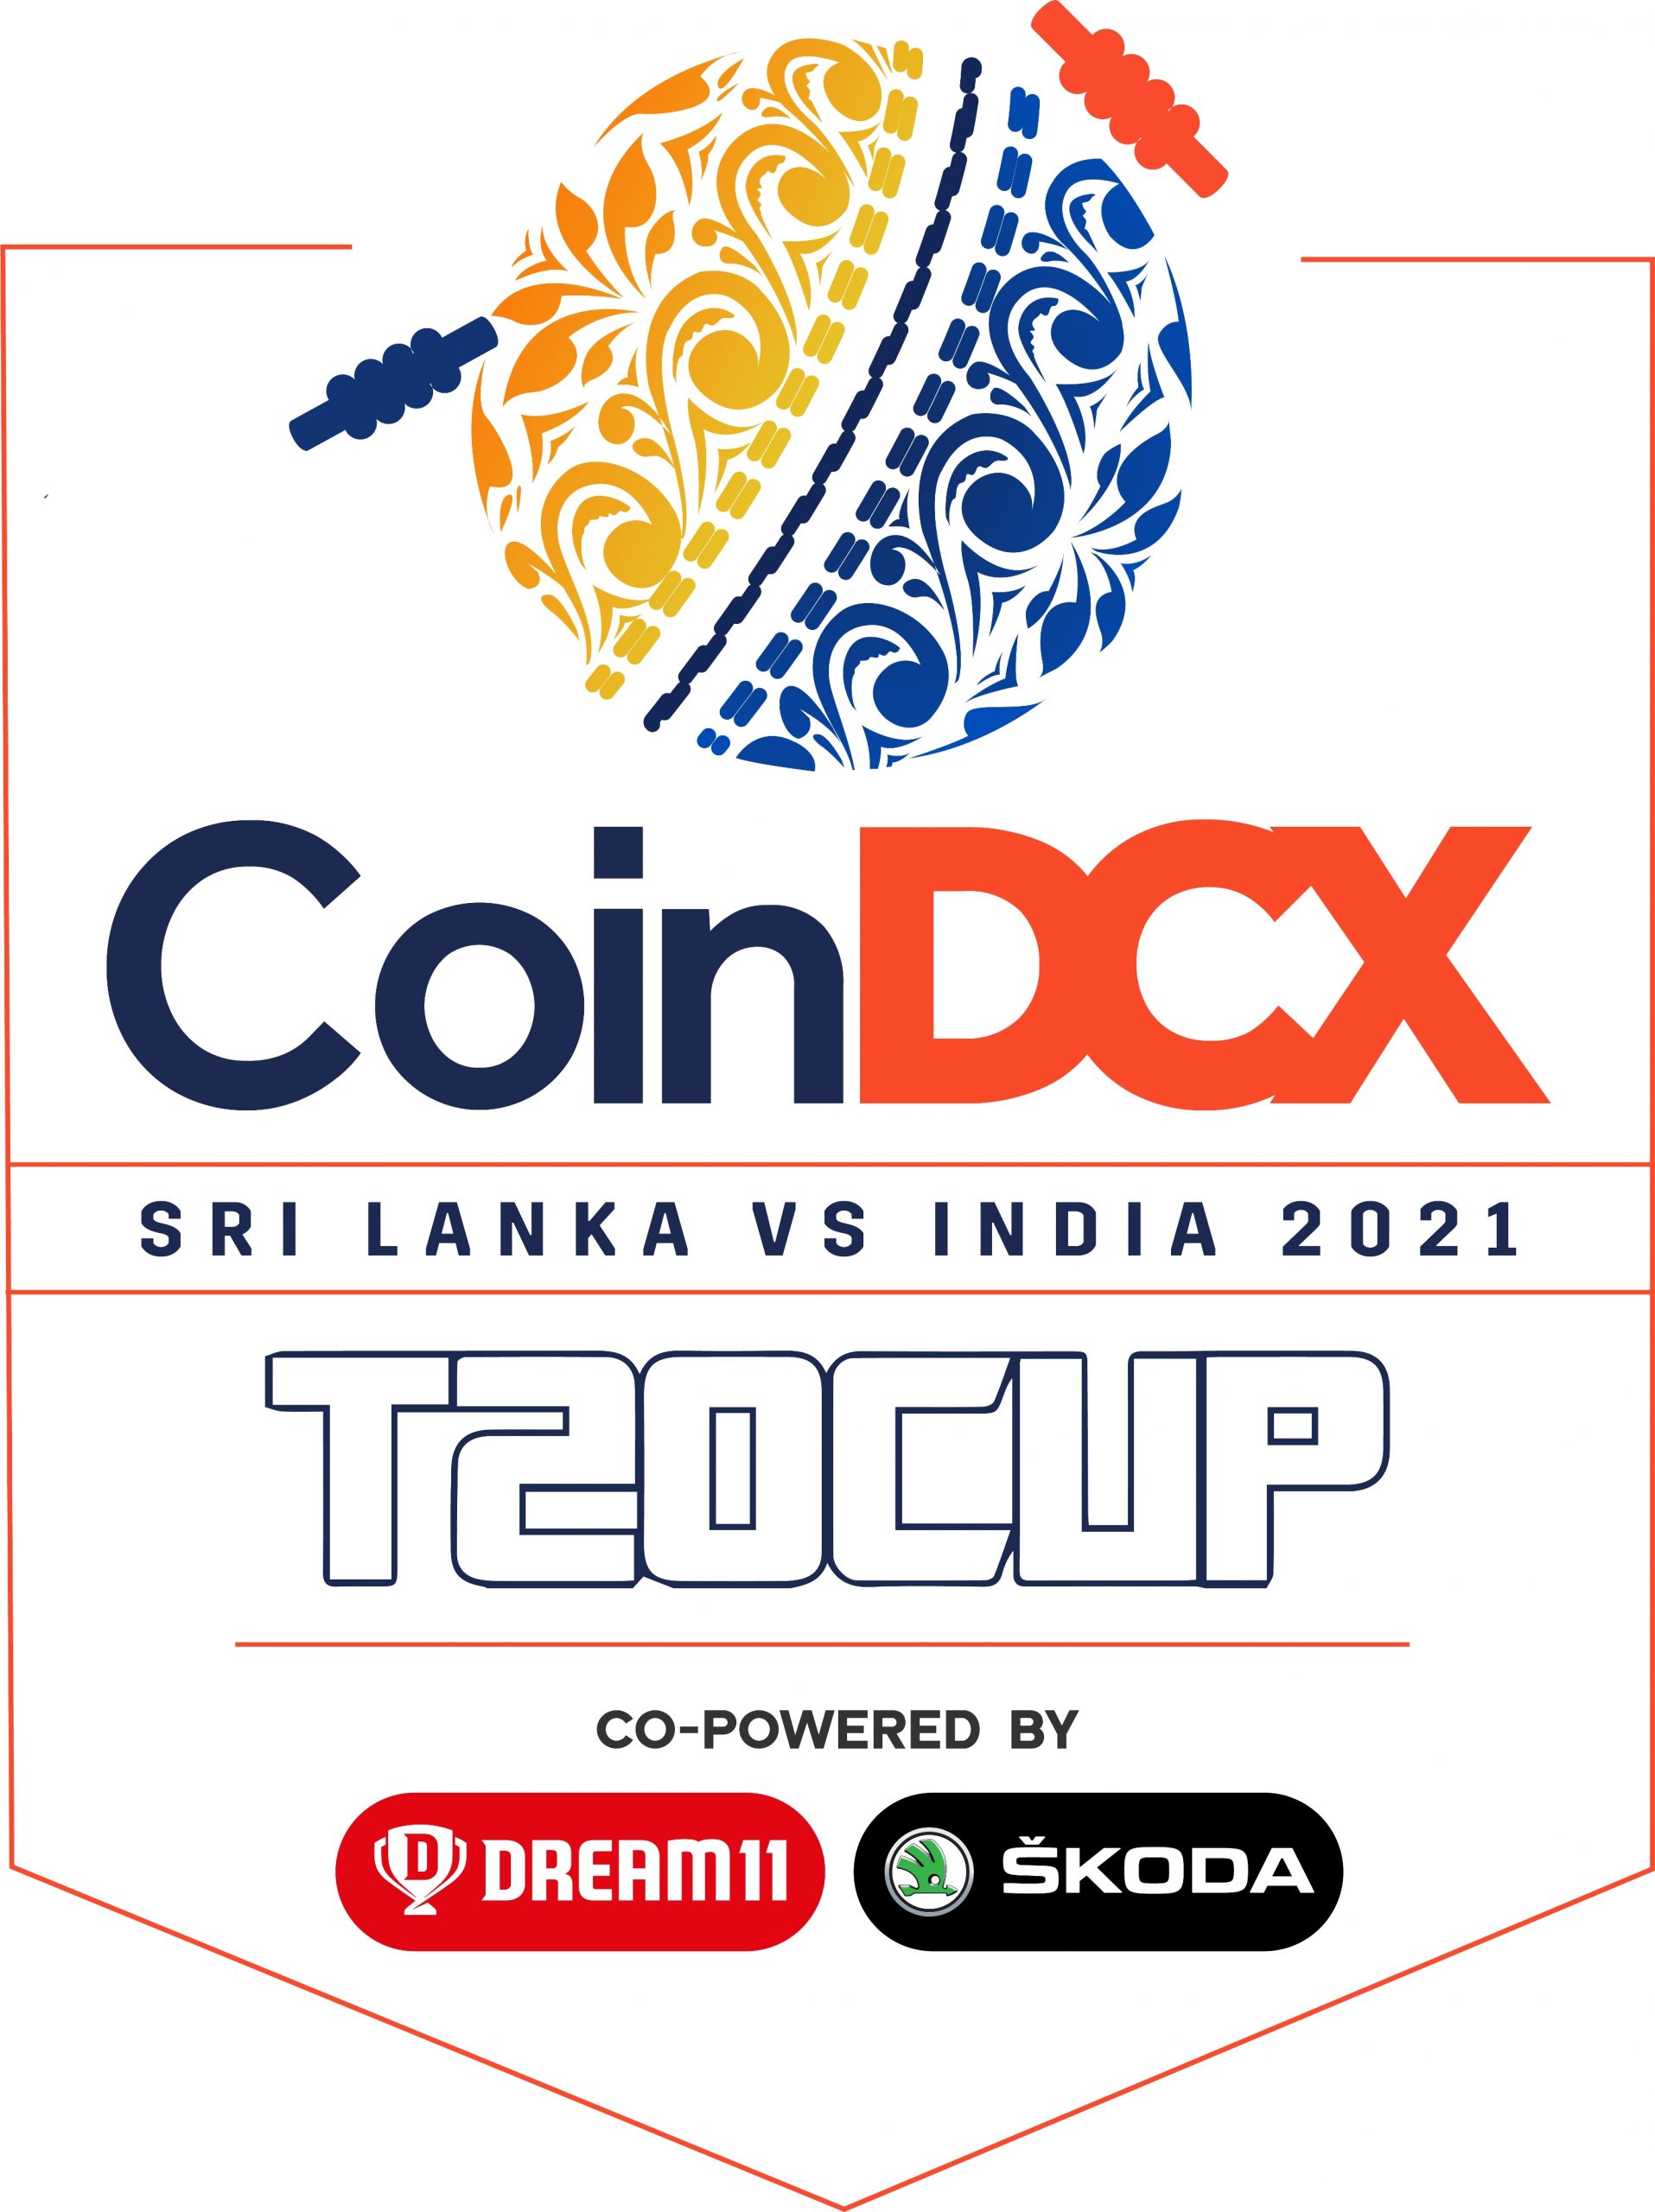 CoinDCX becomes the Official Title Sponsor of the T20I Series between India and Sri Lanka